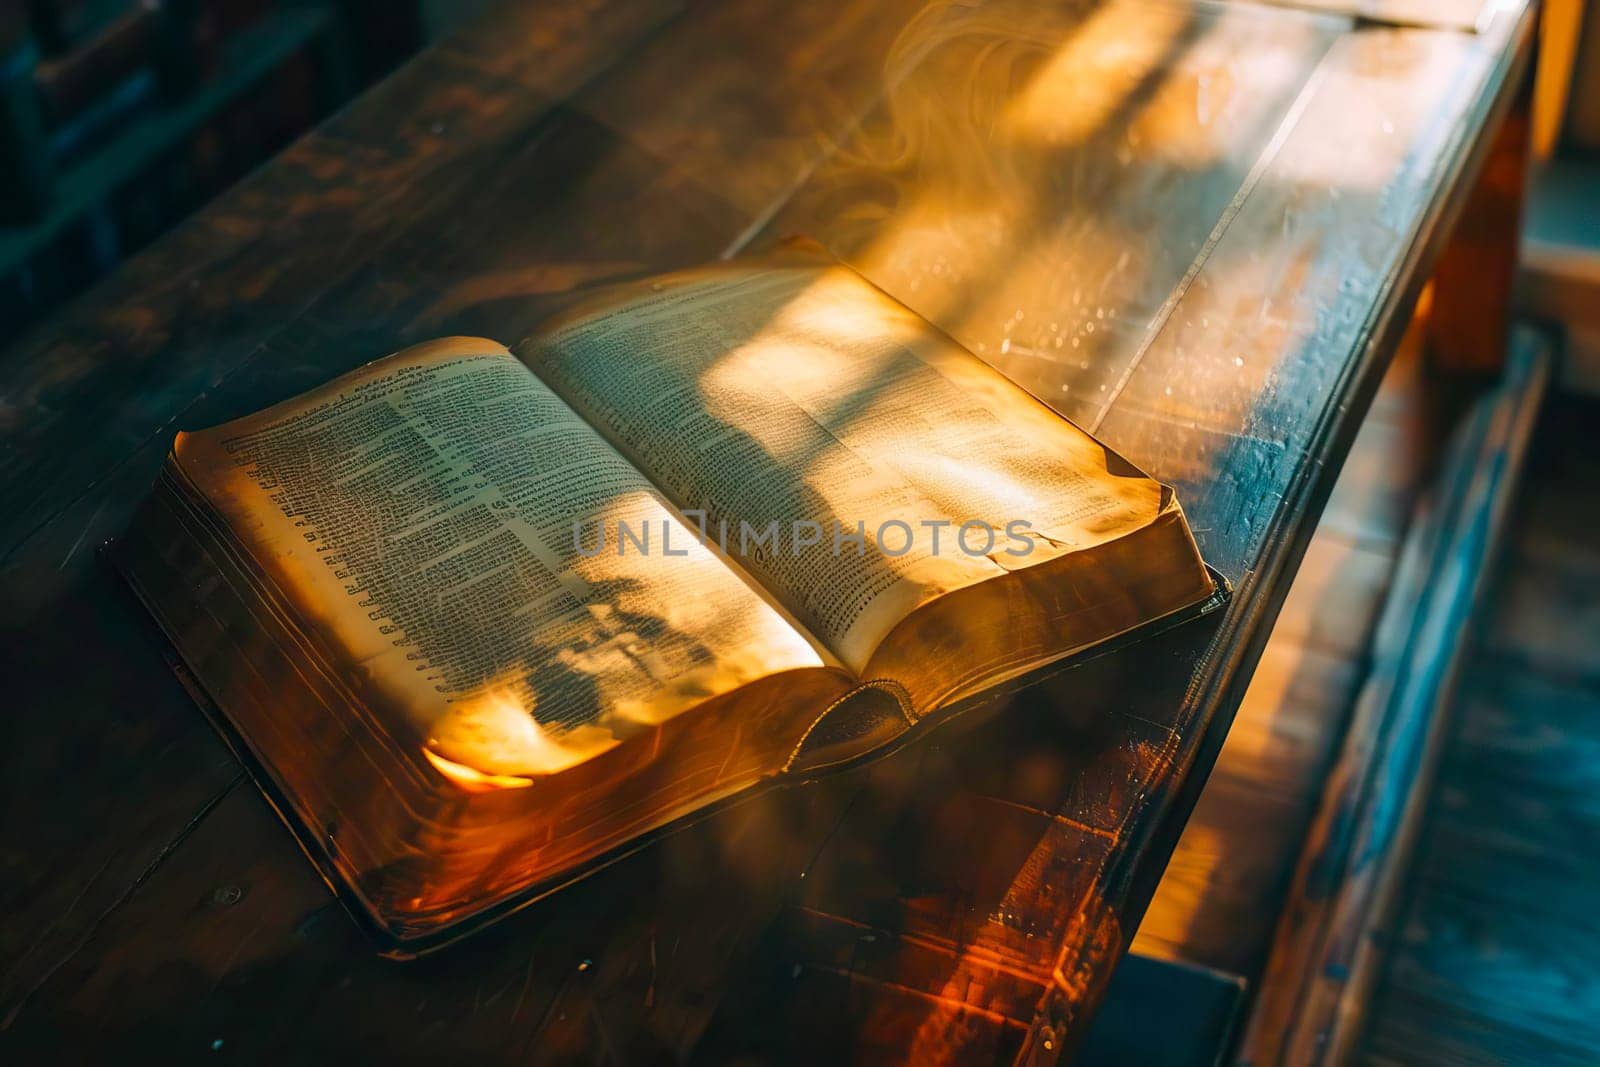 An open book resting on a wooden table, ready to be read or studied.